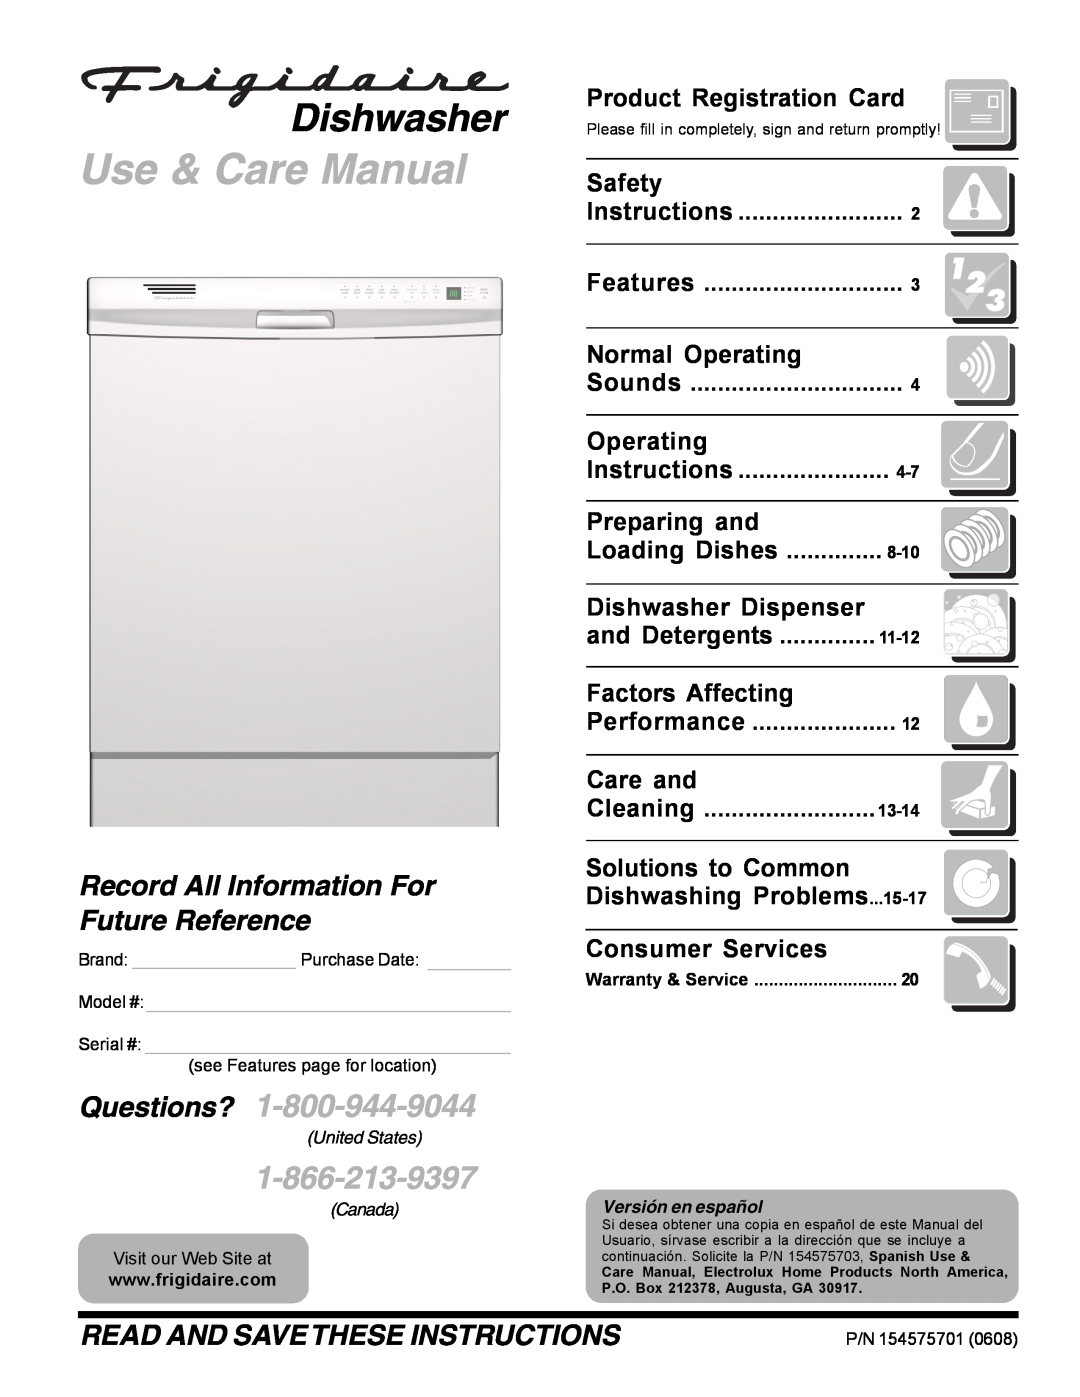 Frigidaire FDB2410HIS warranty Product Registration Card, Safety, Normal Operating, Preparing and, Loading Dishes 